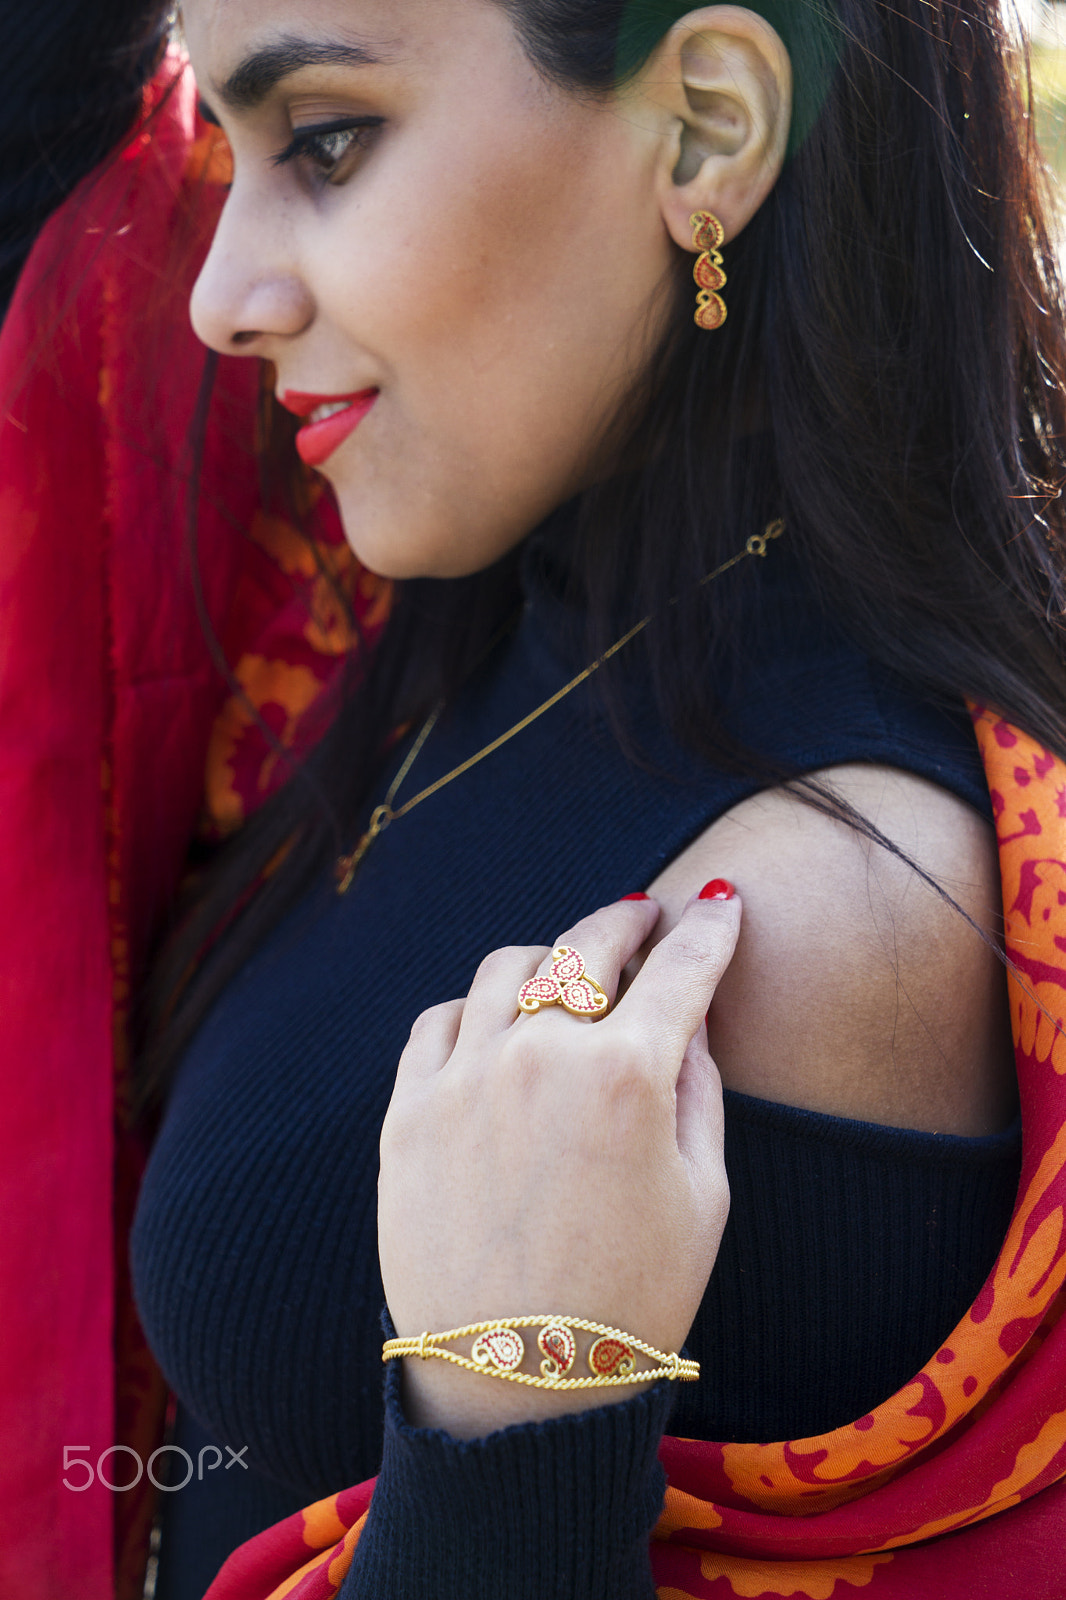 Sony a7 sample photo. Beautiful girl with turkish headscarves and gold antique vintage jewellery photography